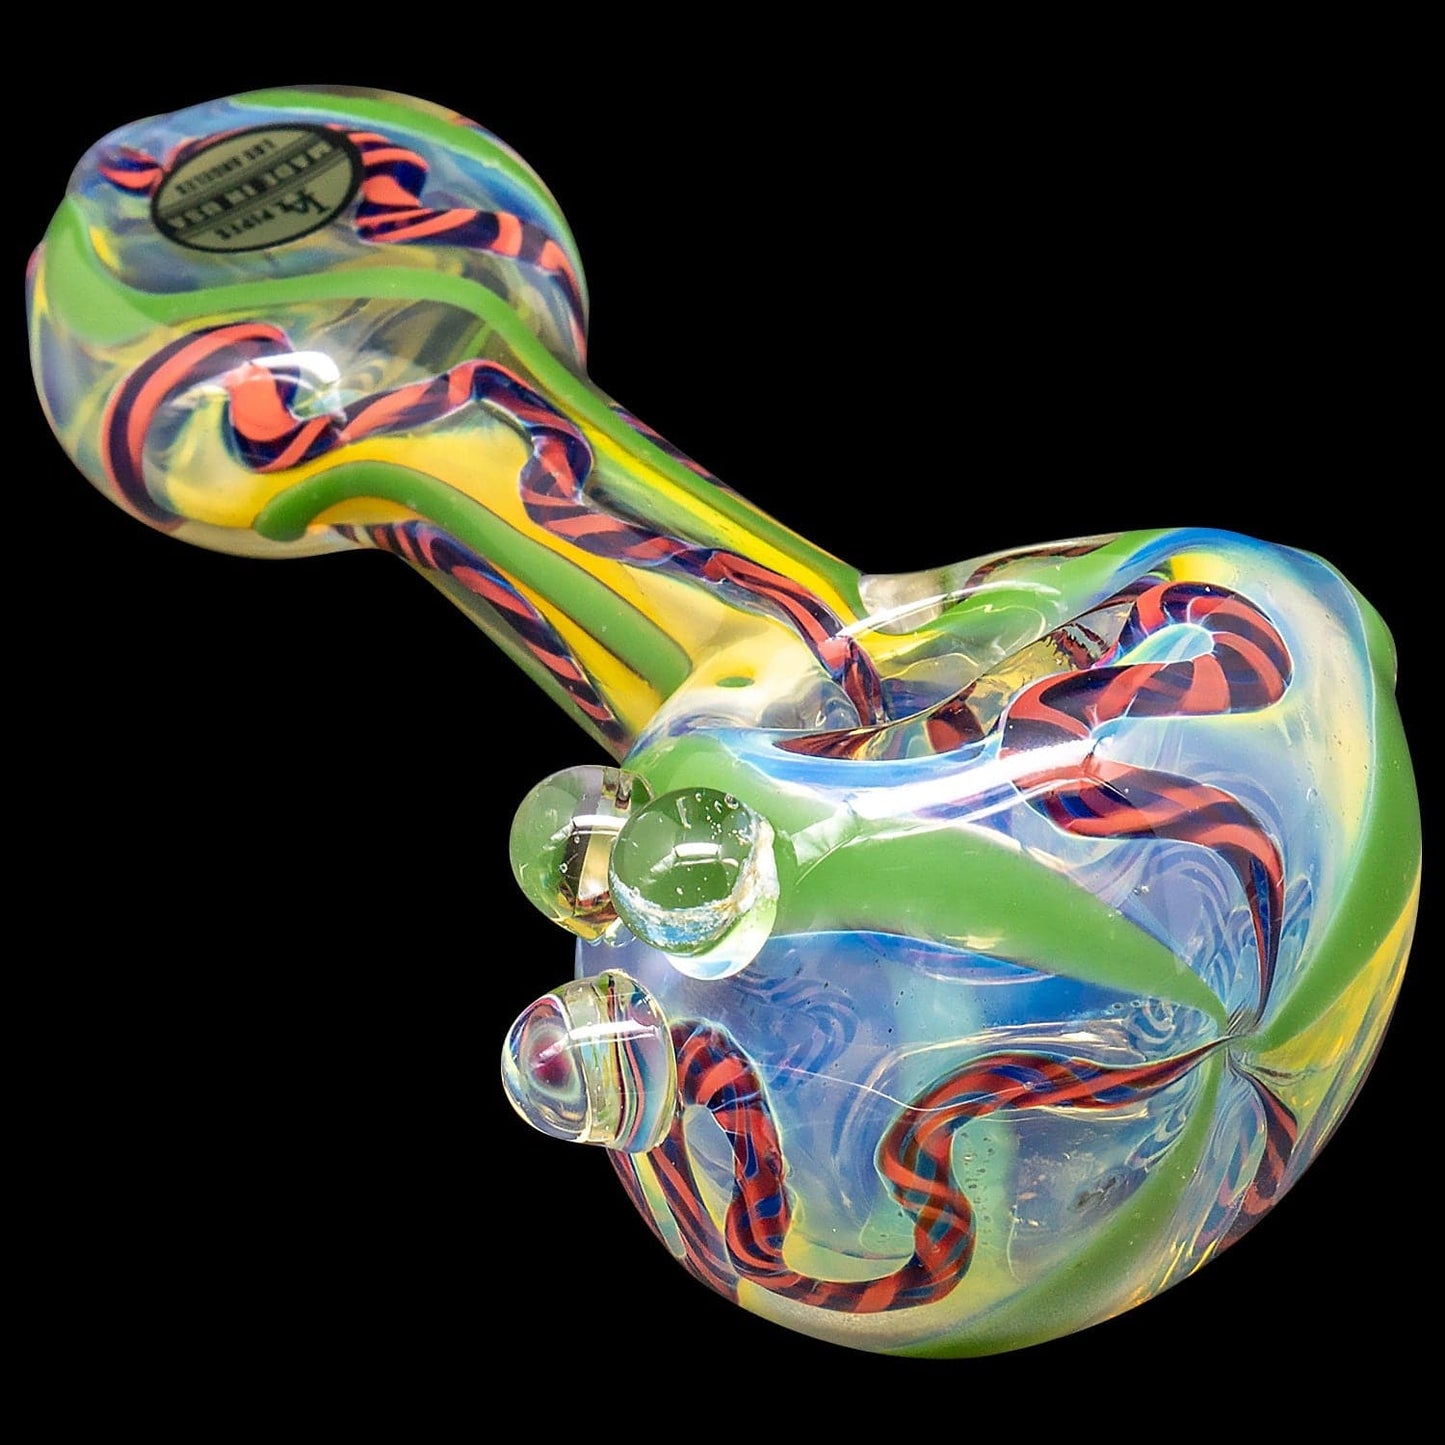 LA Pipes Hand Pipe "Candy Spoon" Inside-Out Color Changing Glass Pipe